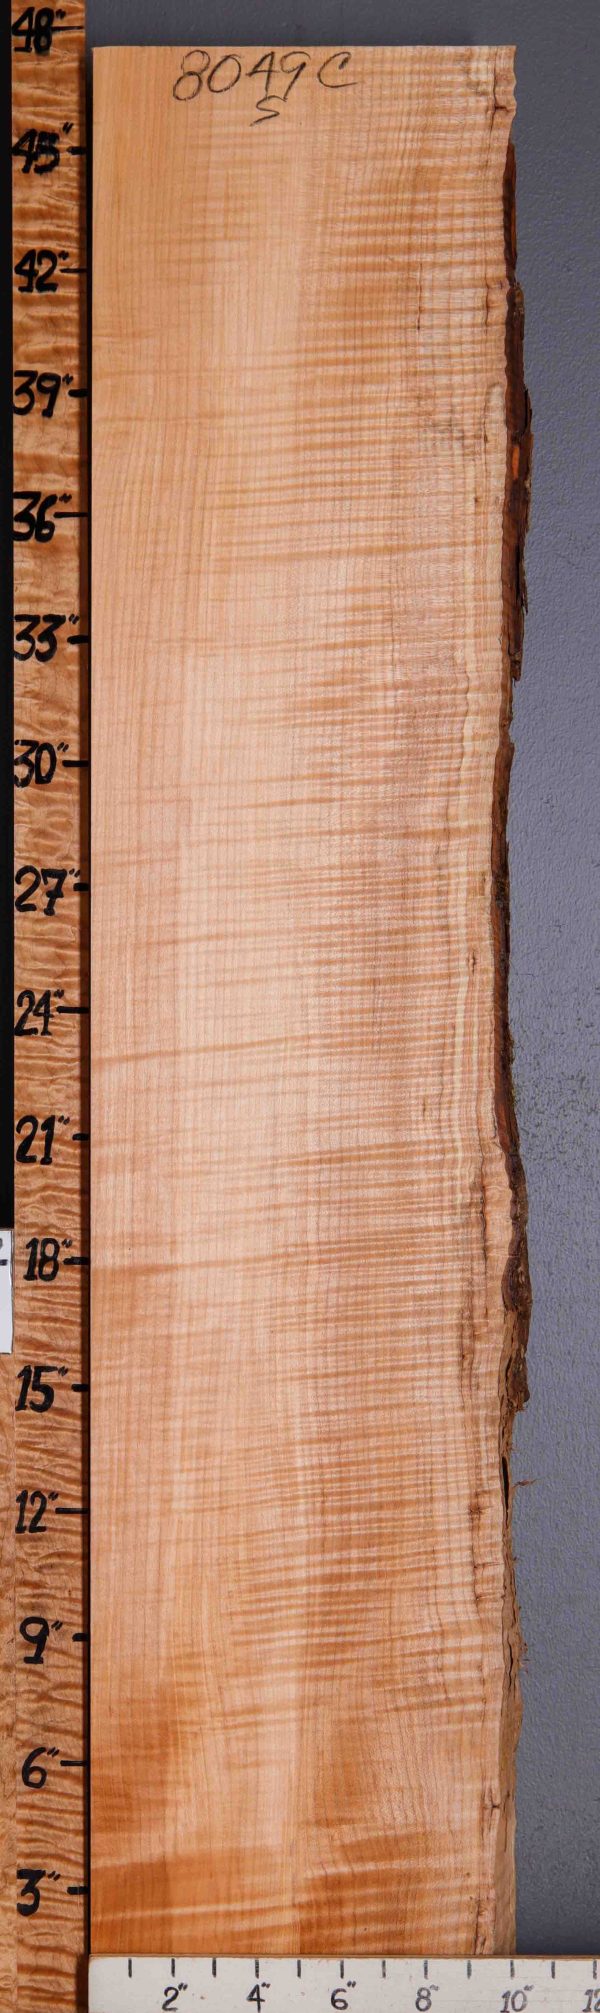 5A Curly Maple Lumber with Live Edge 9"3/4 X 47" X 11/4 (NWT-8049C)